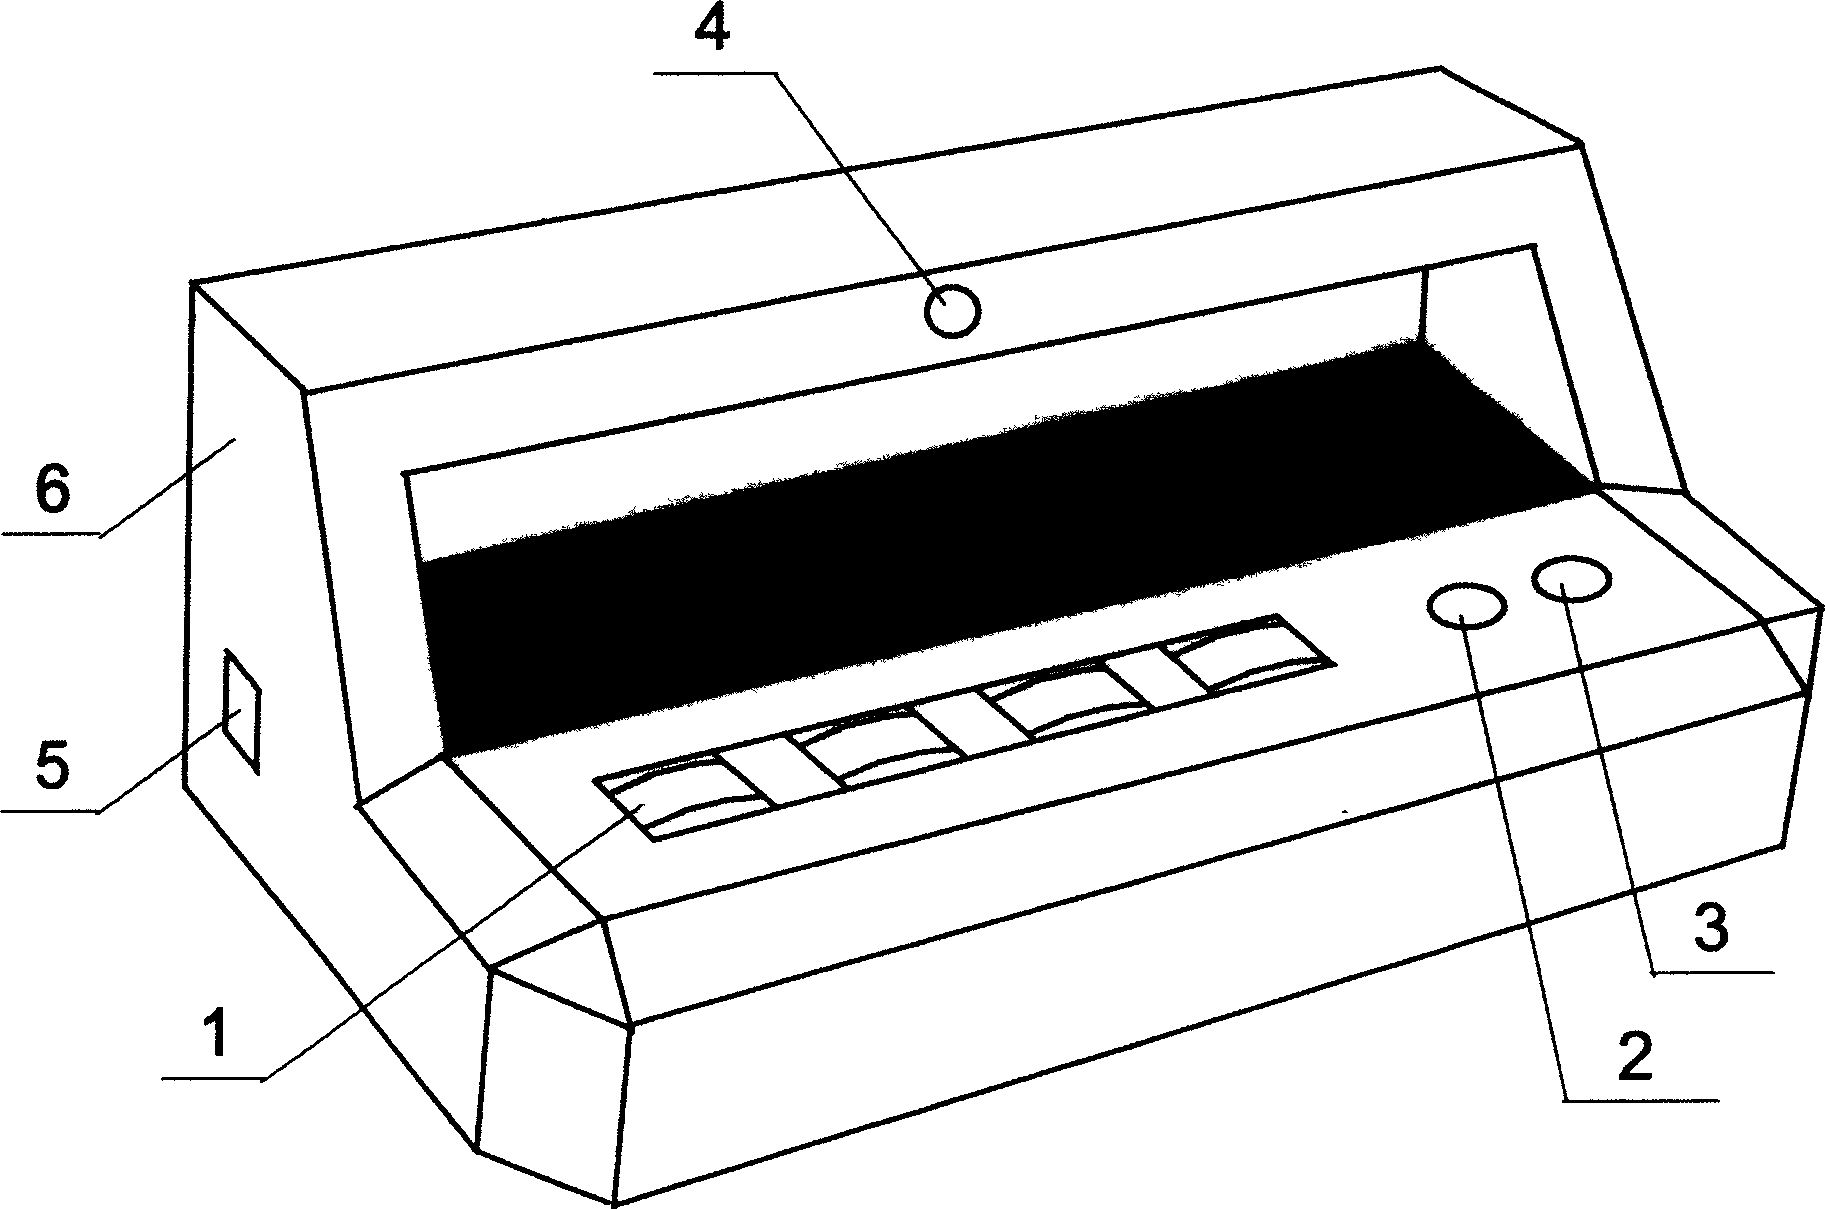 Multiple fake-proof print oil with memory code and its checking method